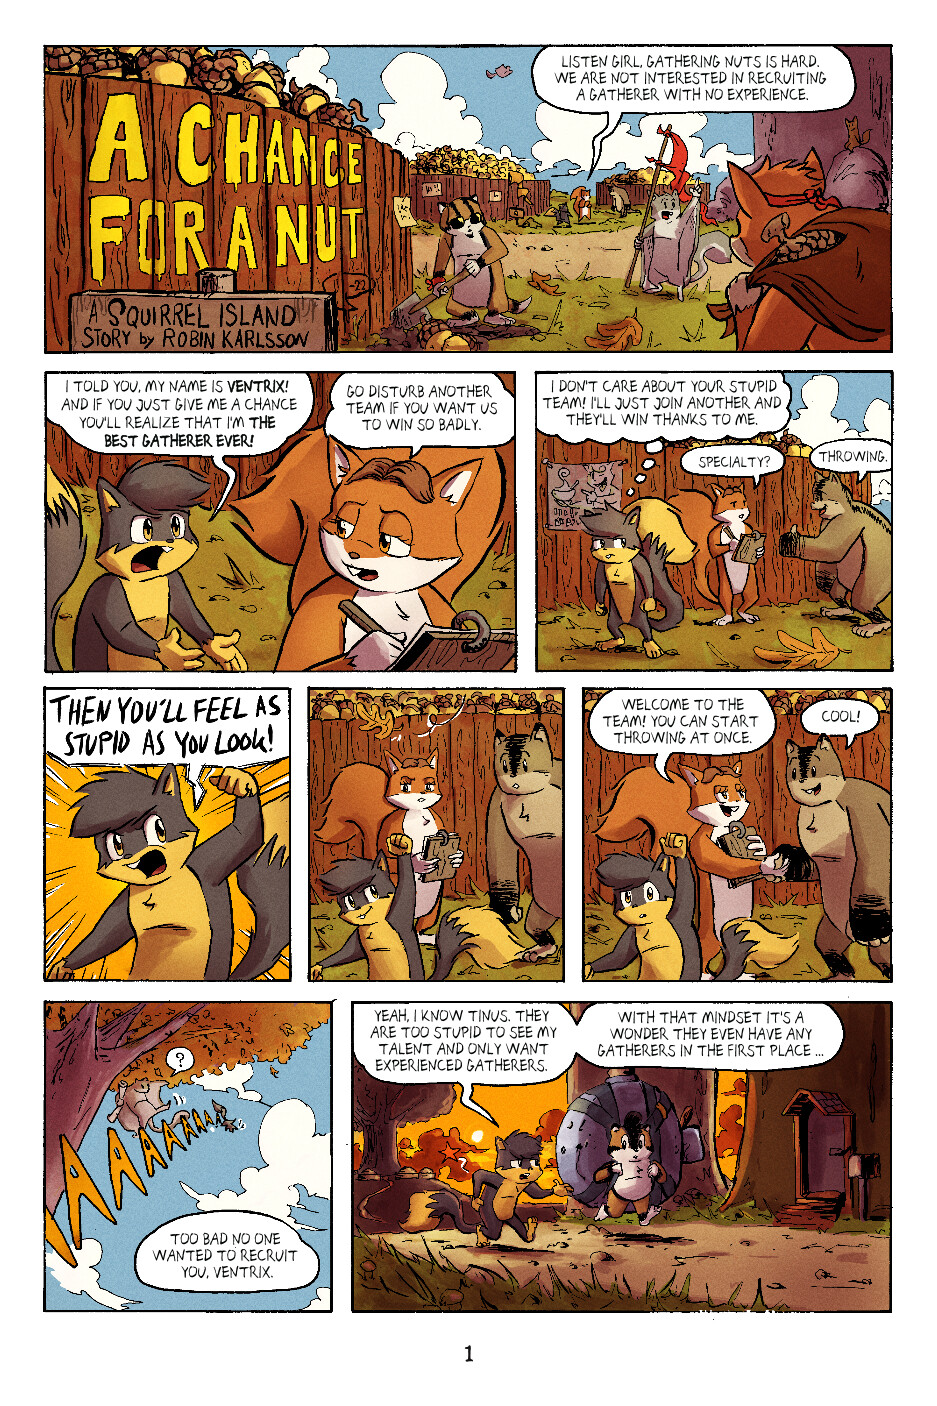 ArtStation - Squirrel Island Comic: A chance for a nut (11 page pdf) |  Books & Comics